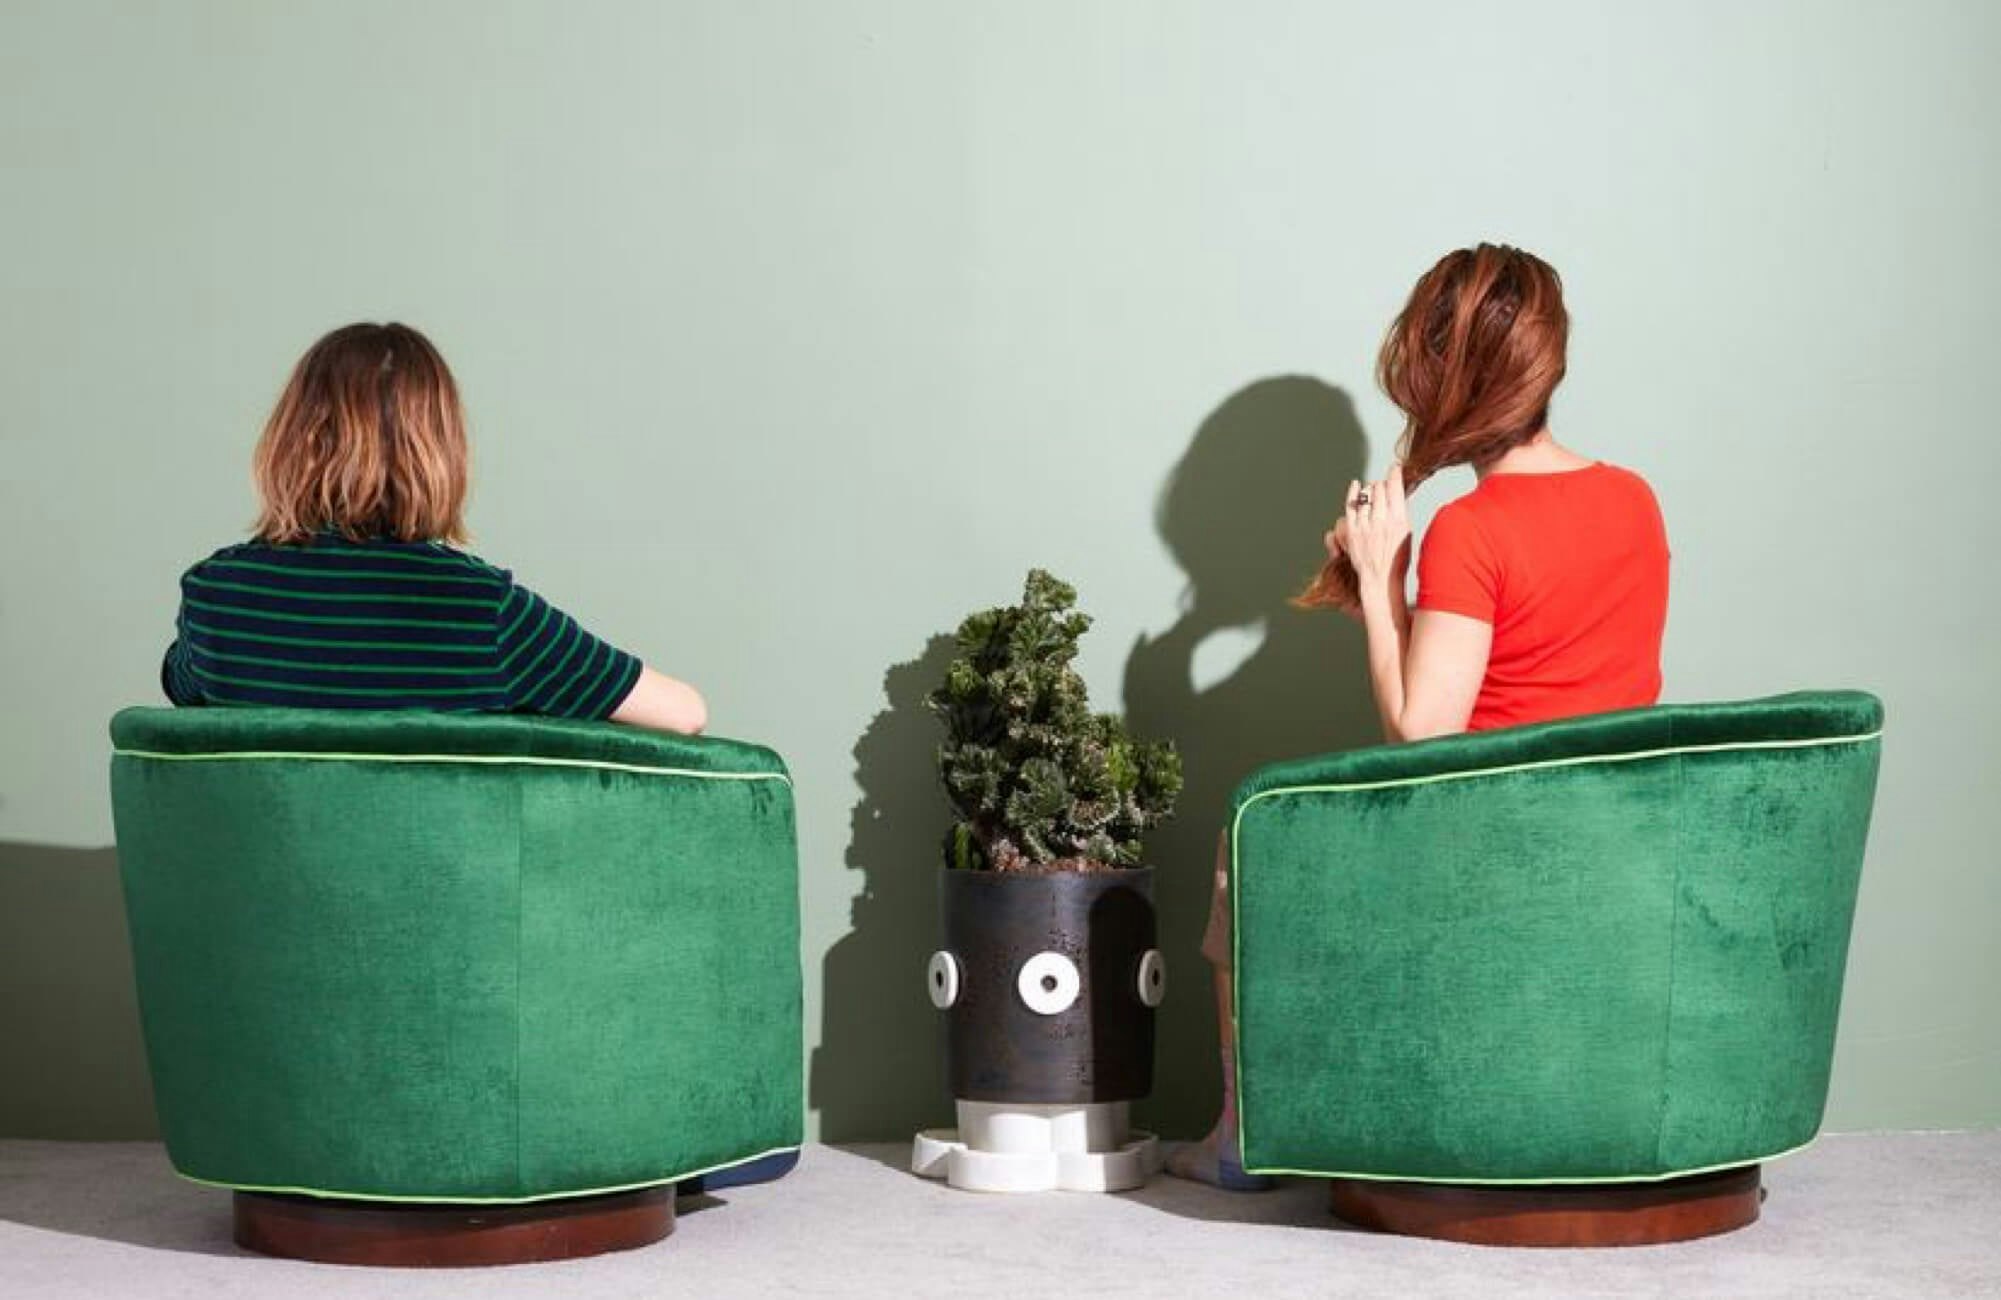 Two people sitting in green chairs facing away, towards a painted green wall